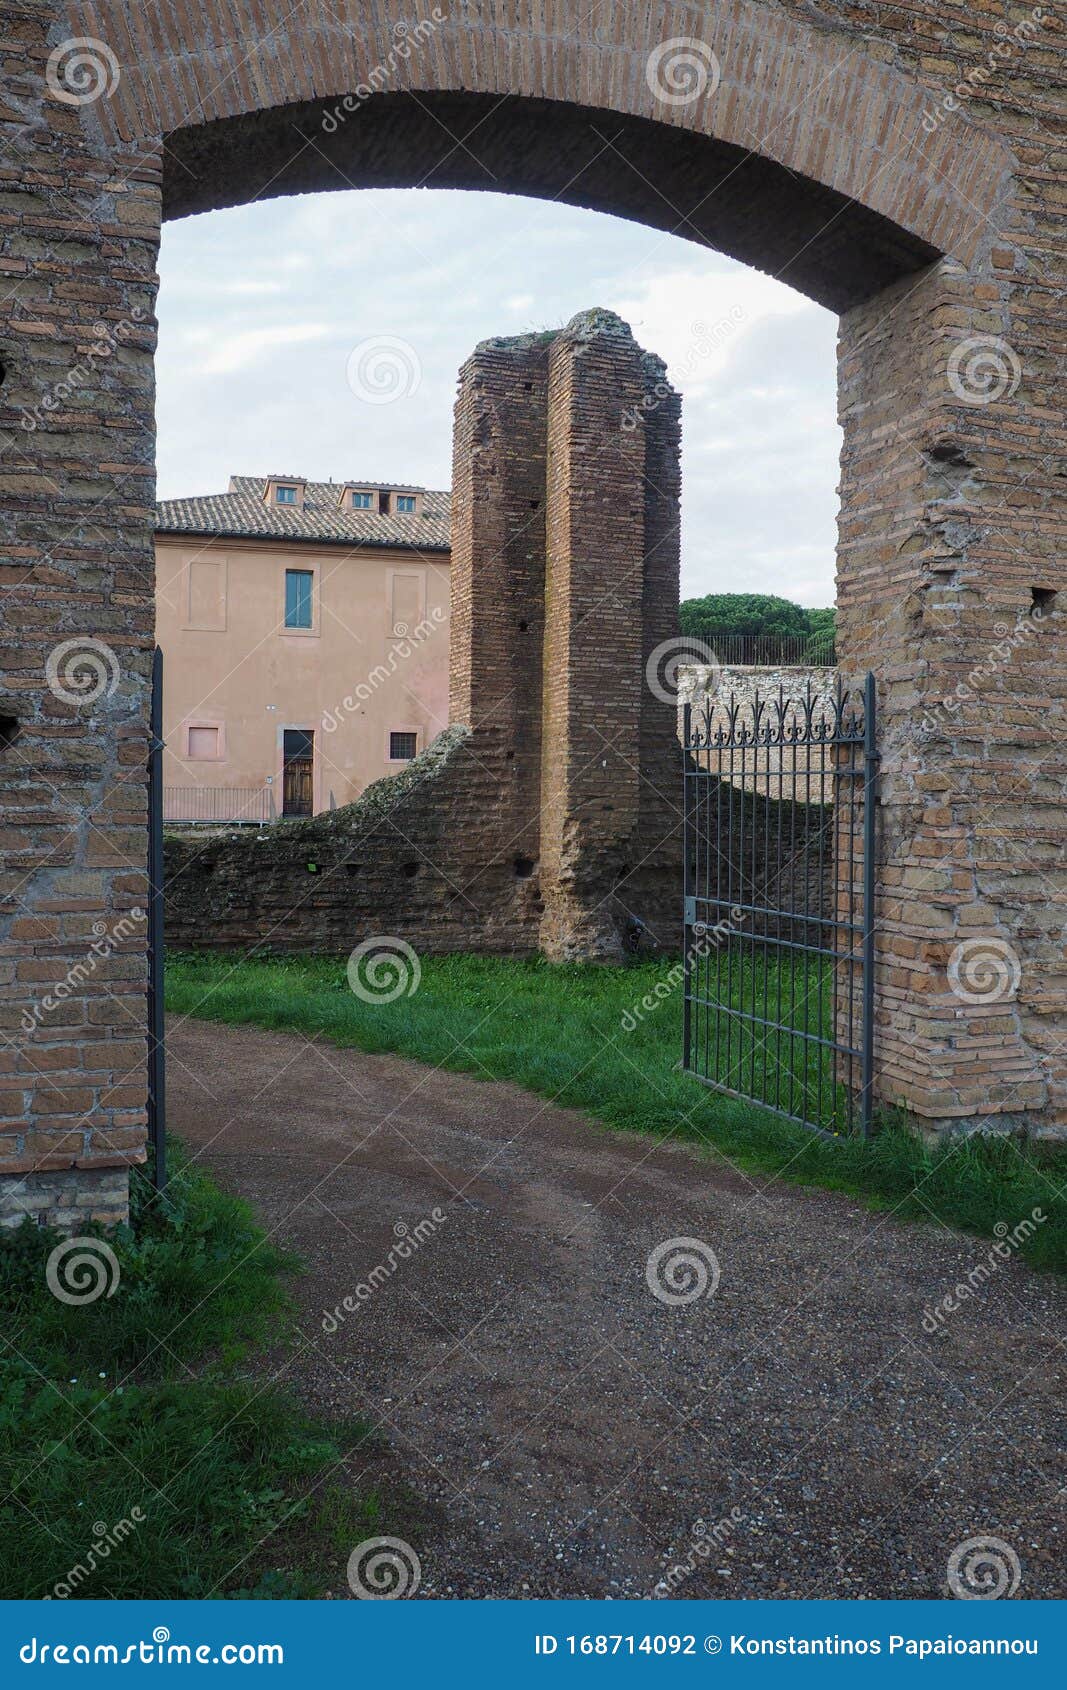 The Villa of Maxentius in Rome, Italy Stock Photo - Image of monument ...